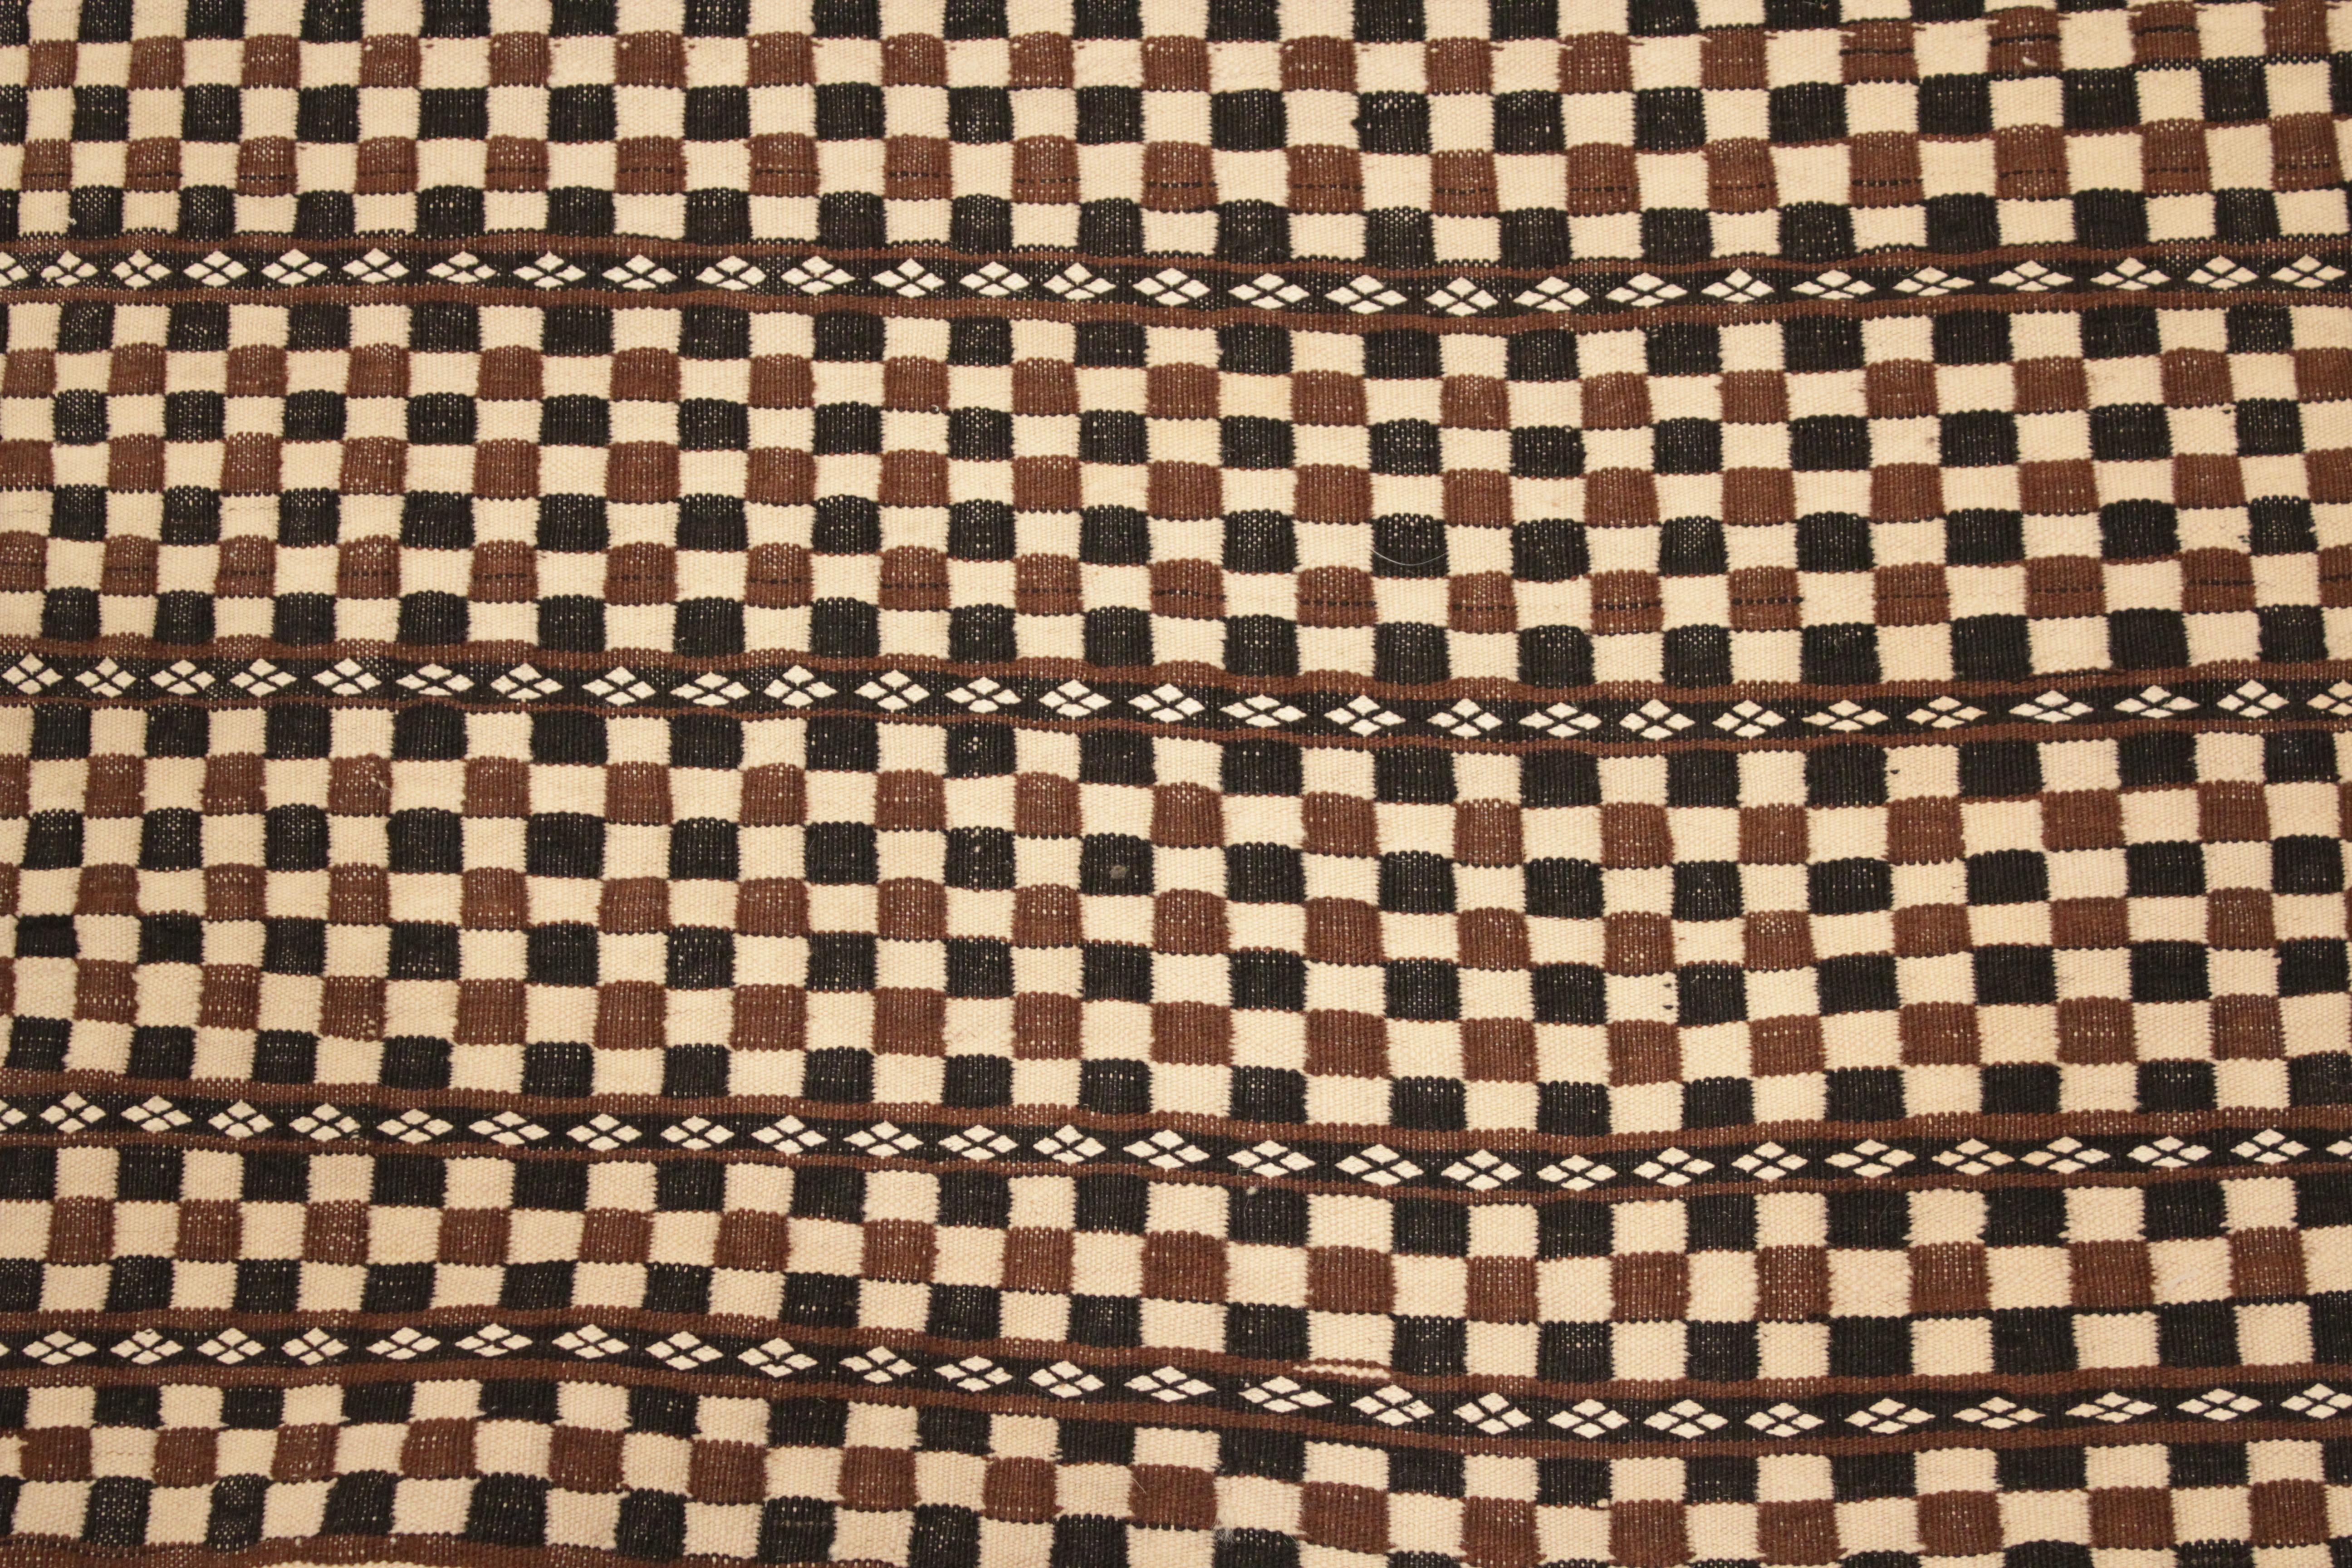 A very elegant and refined Berber weaving, composed of an honeycomb arrangement of ivory, chocolate brown and black squares contained within horizontal compartments. The extreme fineness of weave and the uniqueness of the design allows us to date